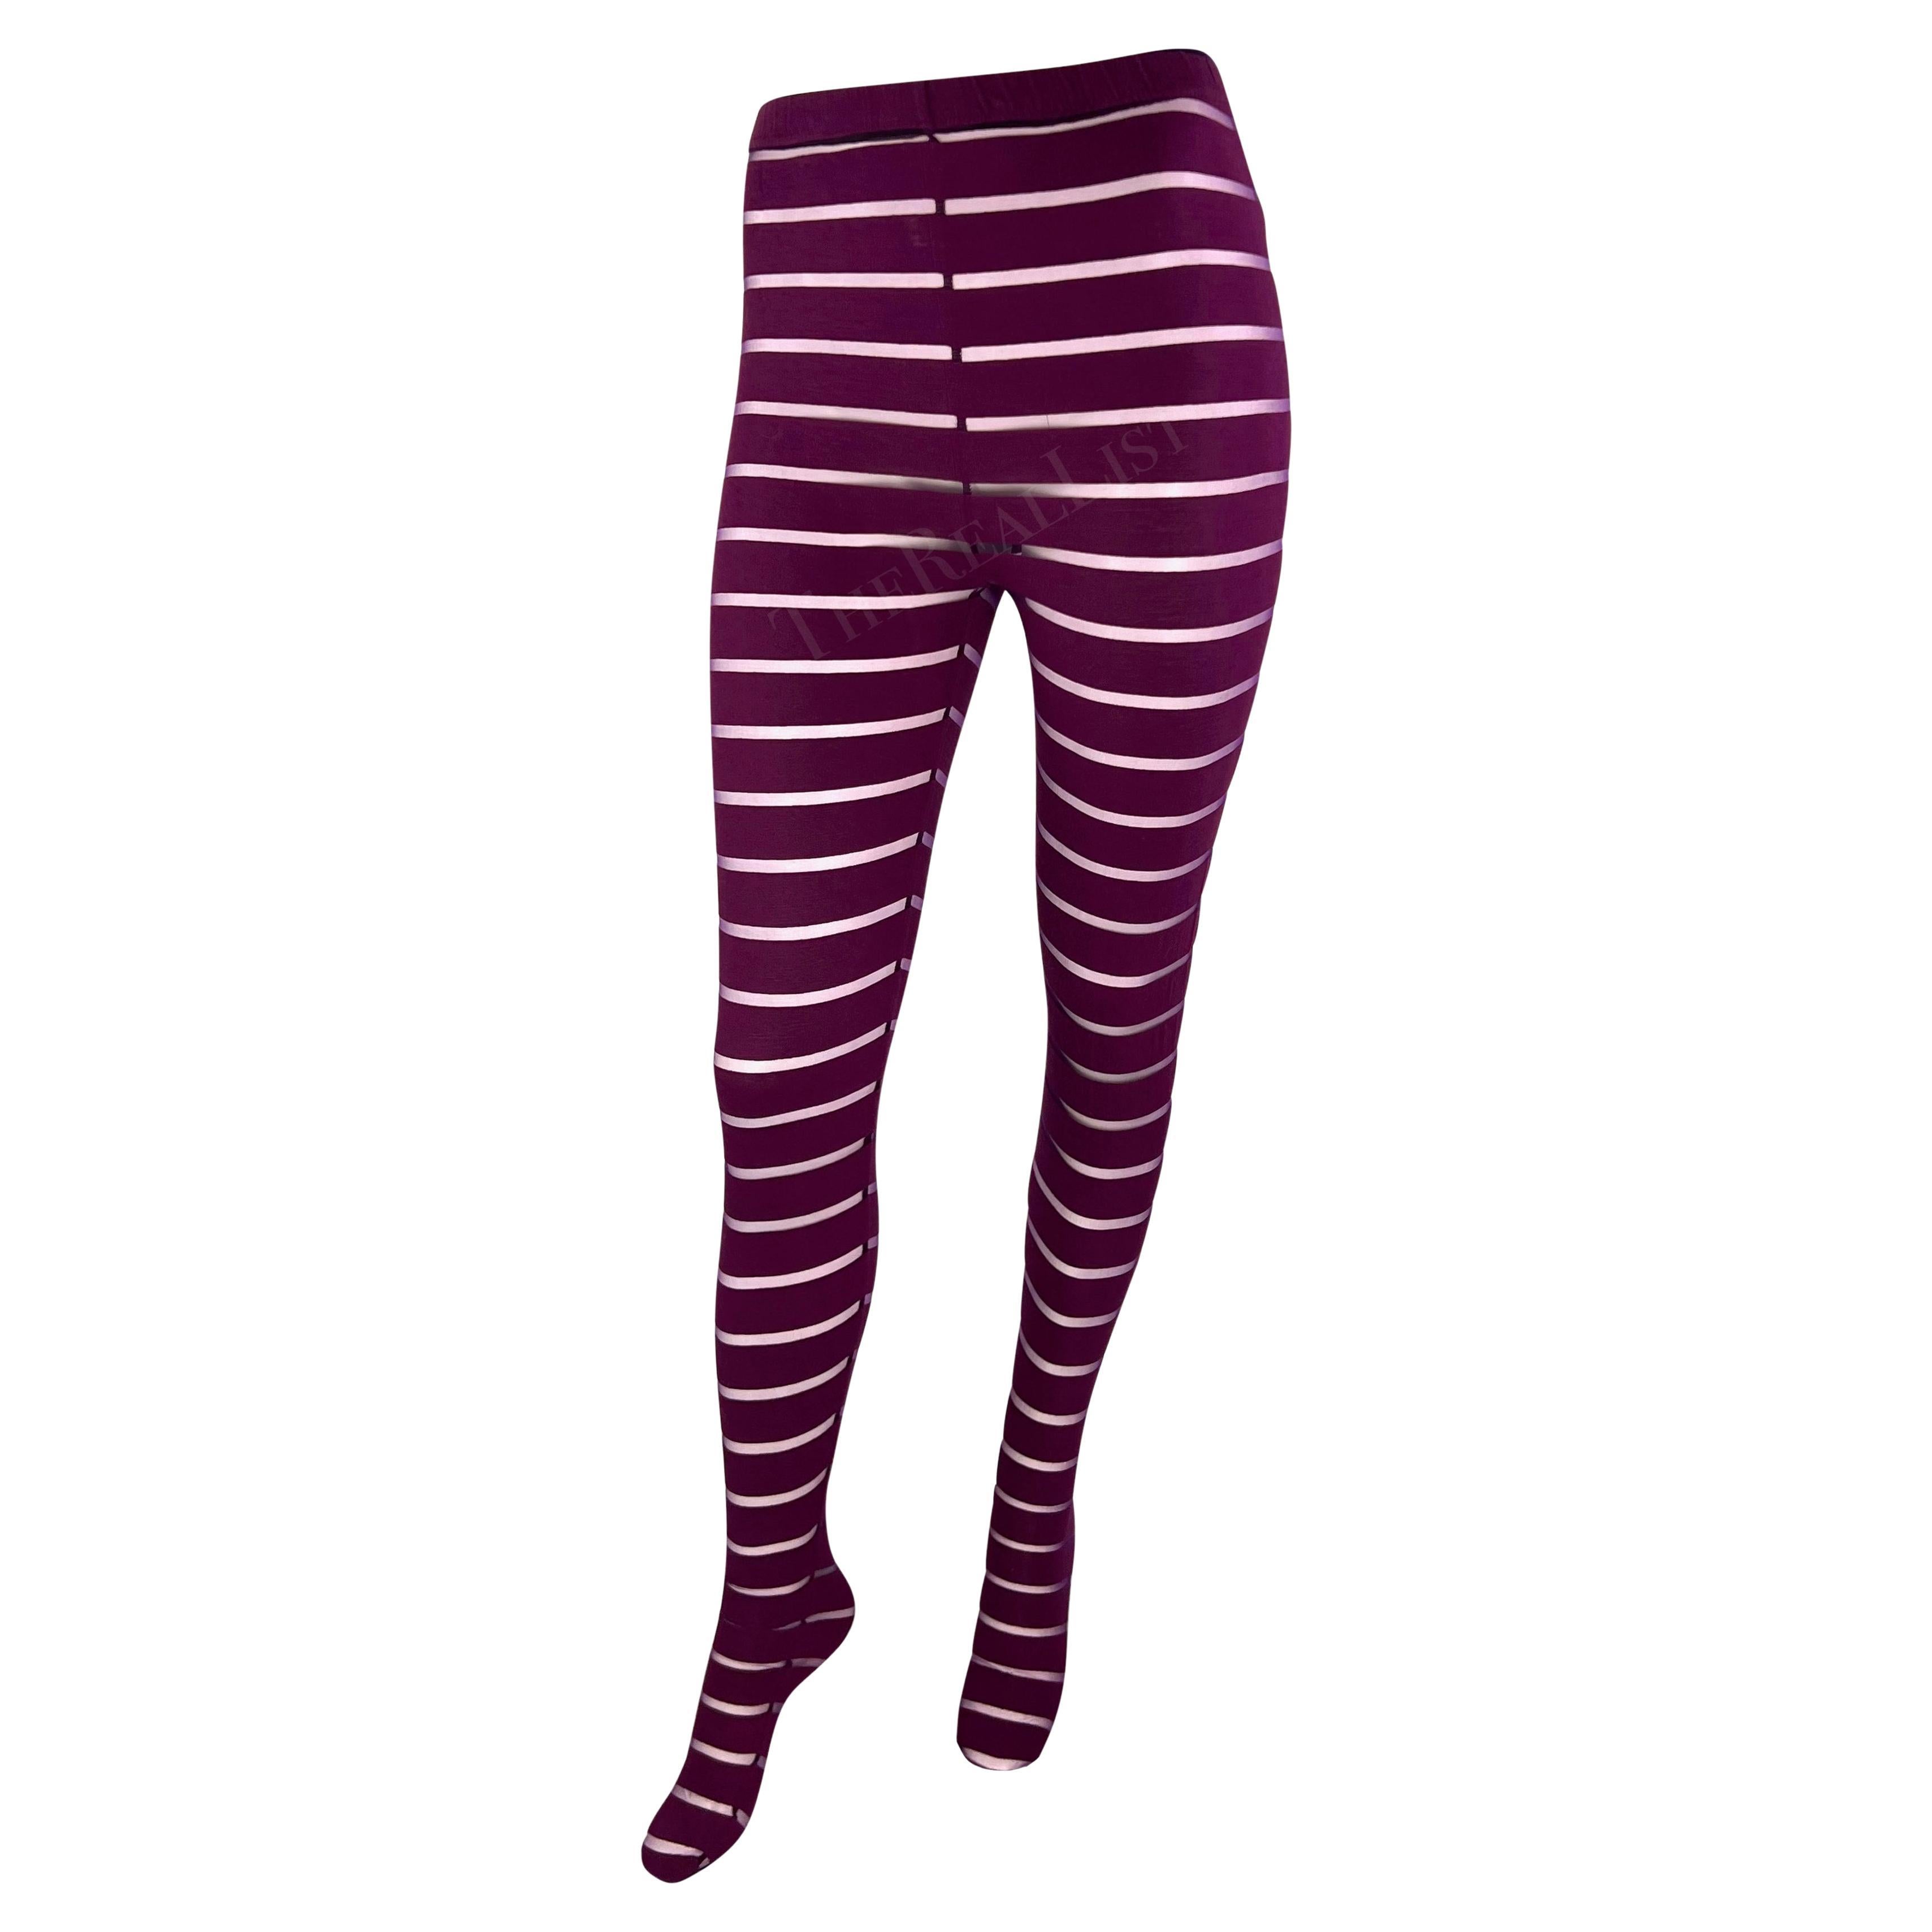 F/W 1993 Gianni Versace Runway Sheer Purple Stripe Leggings In Excellent Condition For Sale In West Hollywood, CA